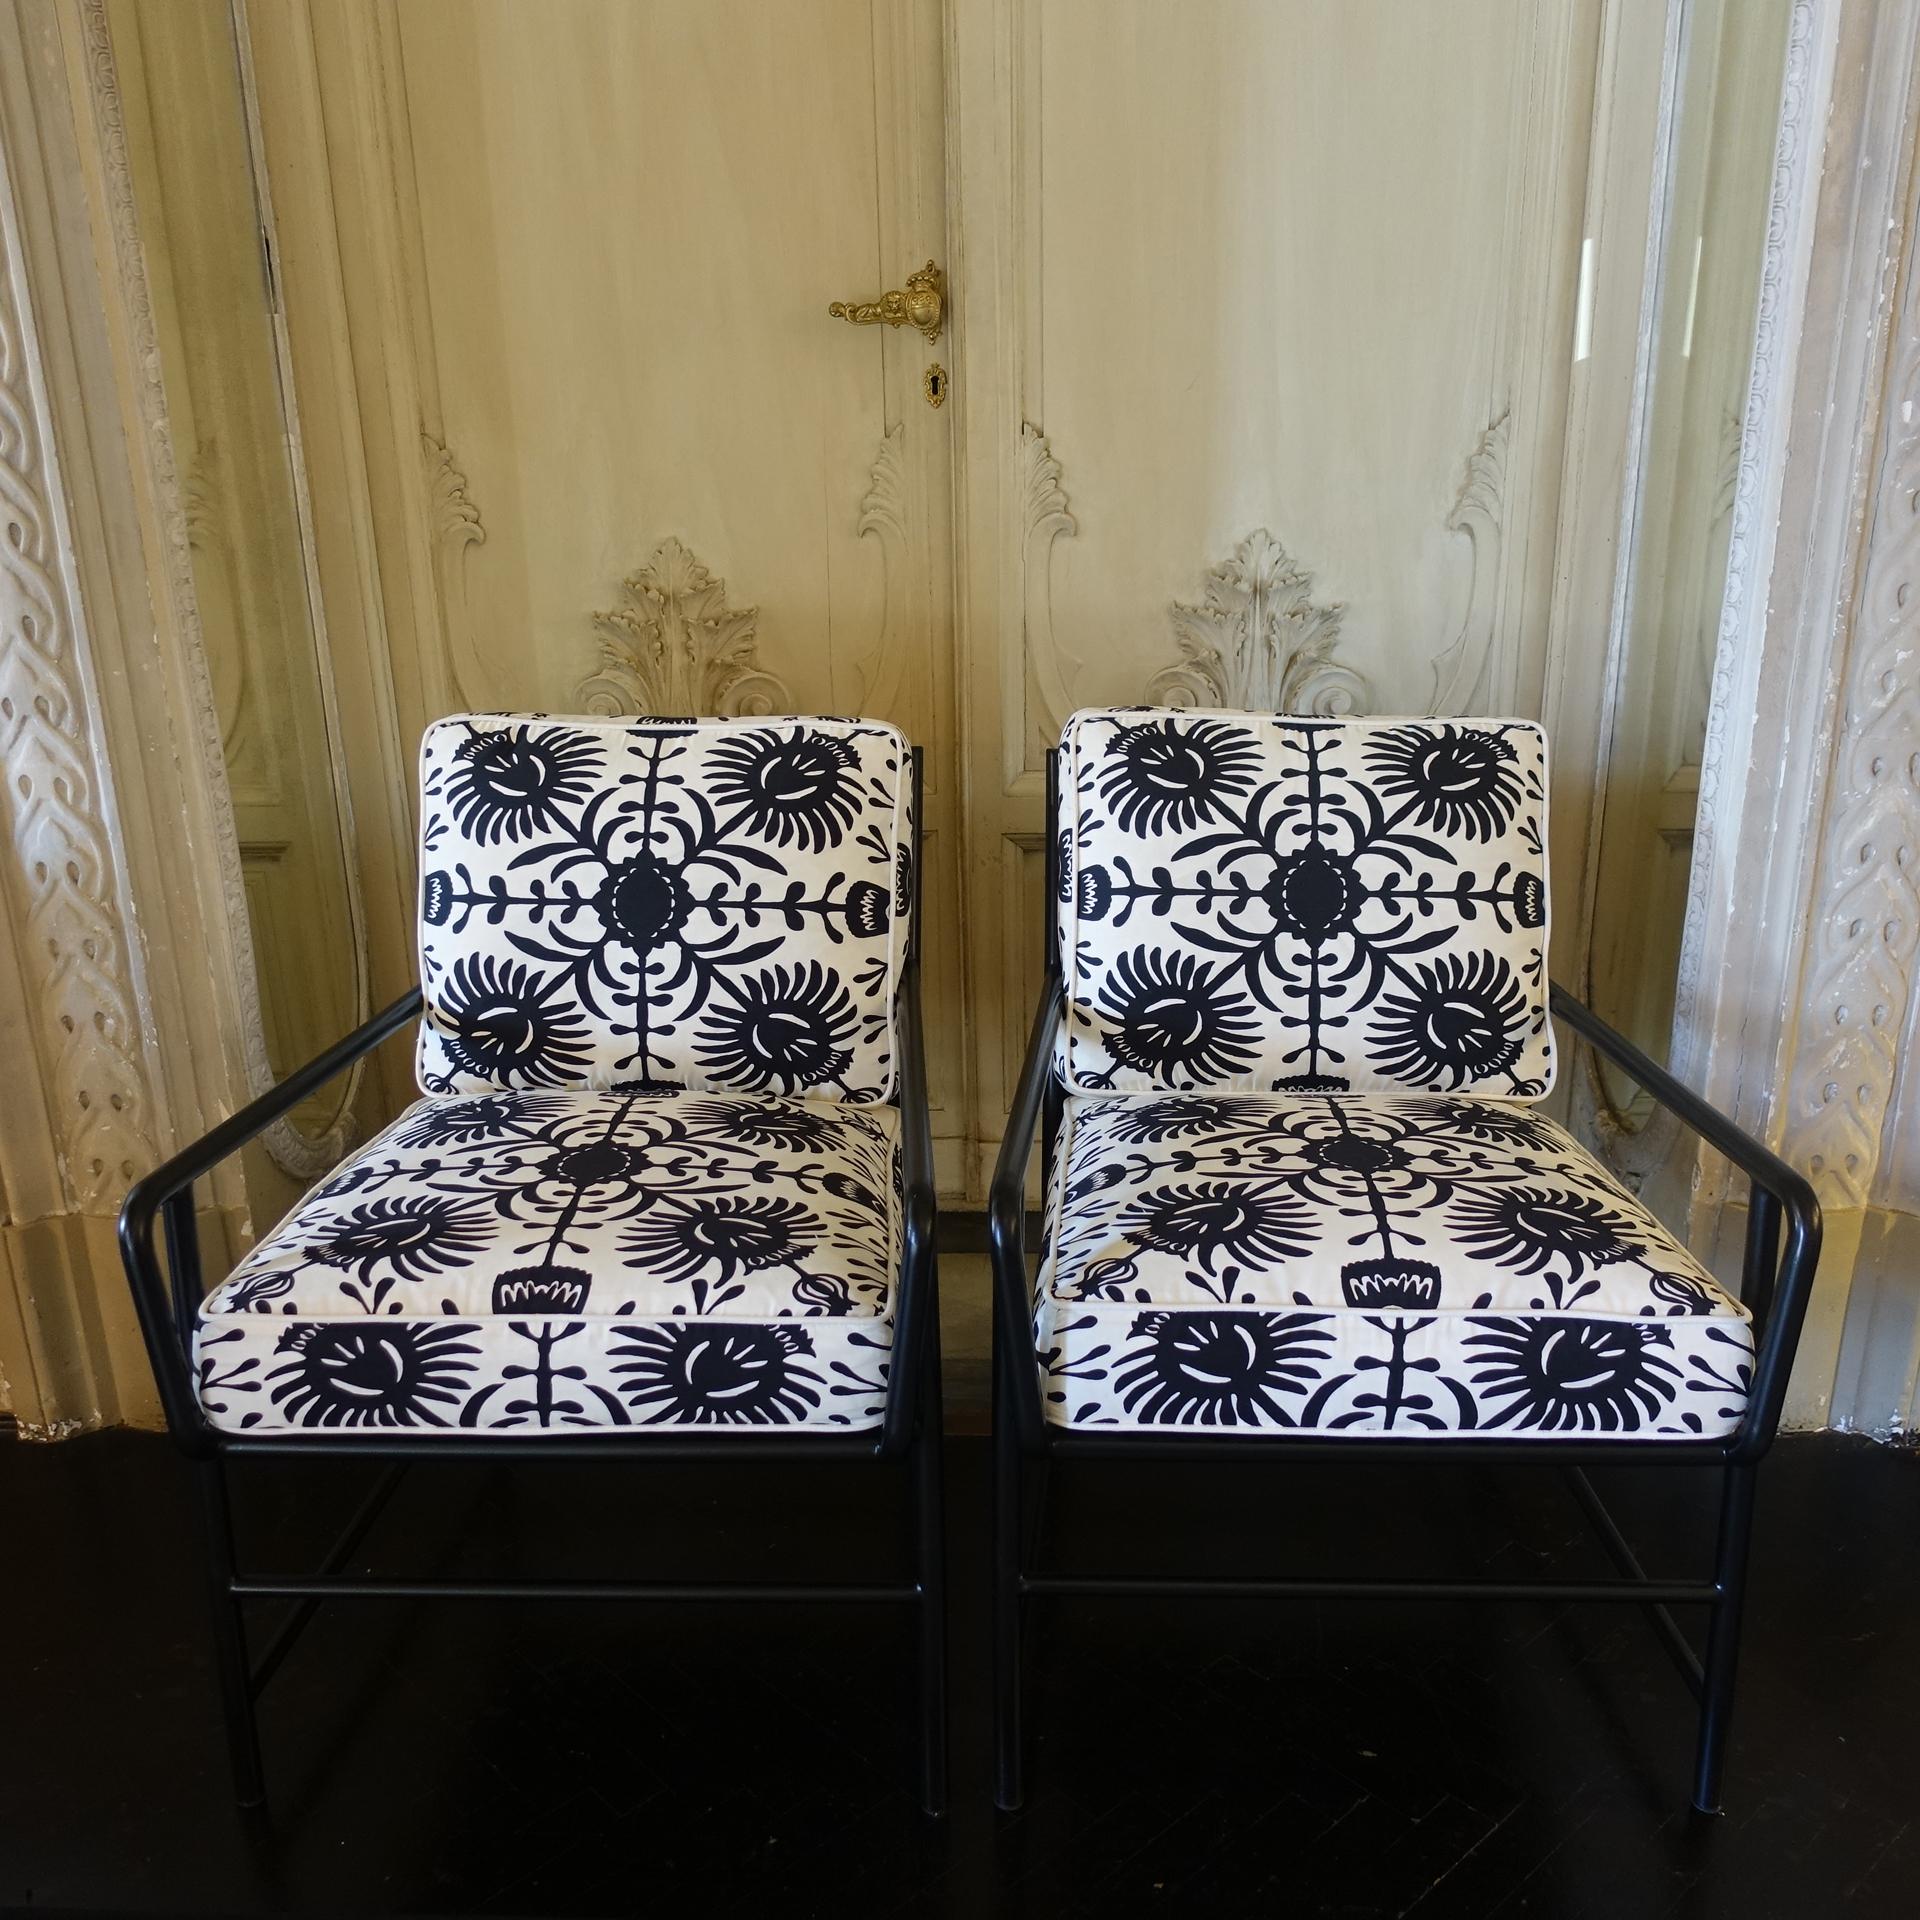 One of a kind pair of contemporary armchairs with black metal frame and perforated backrest with hexagonal motif, newly upholstered seat and back cushion in black and white floral print.